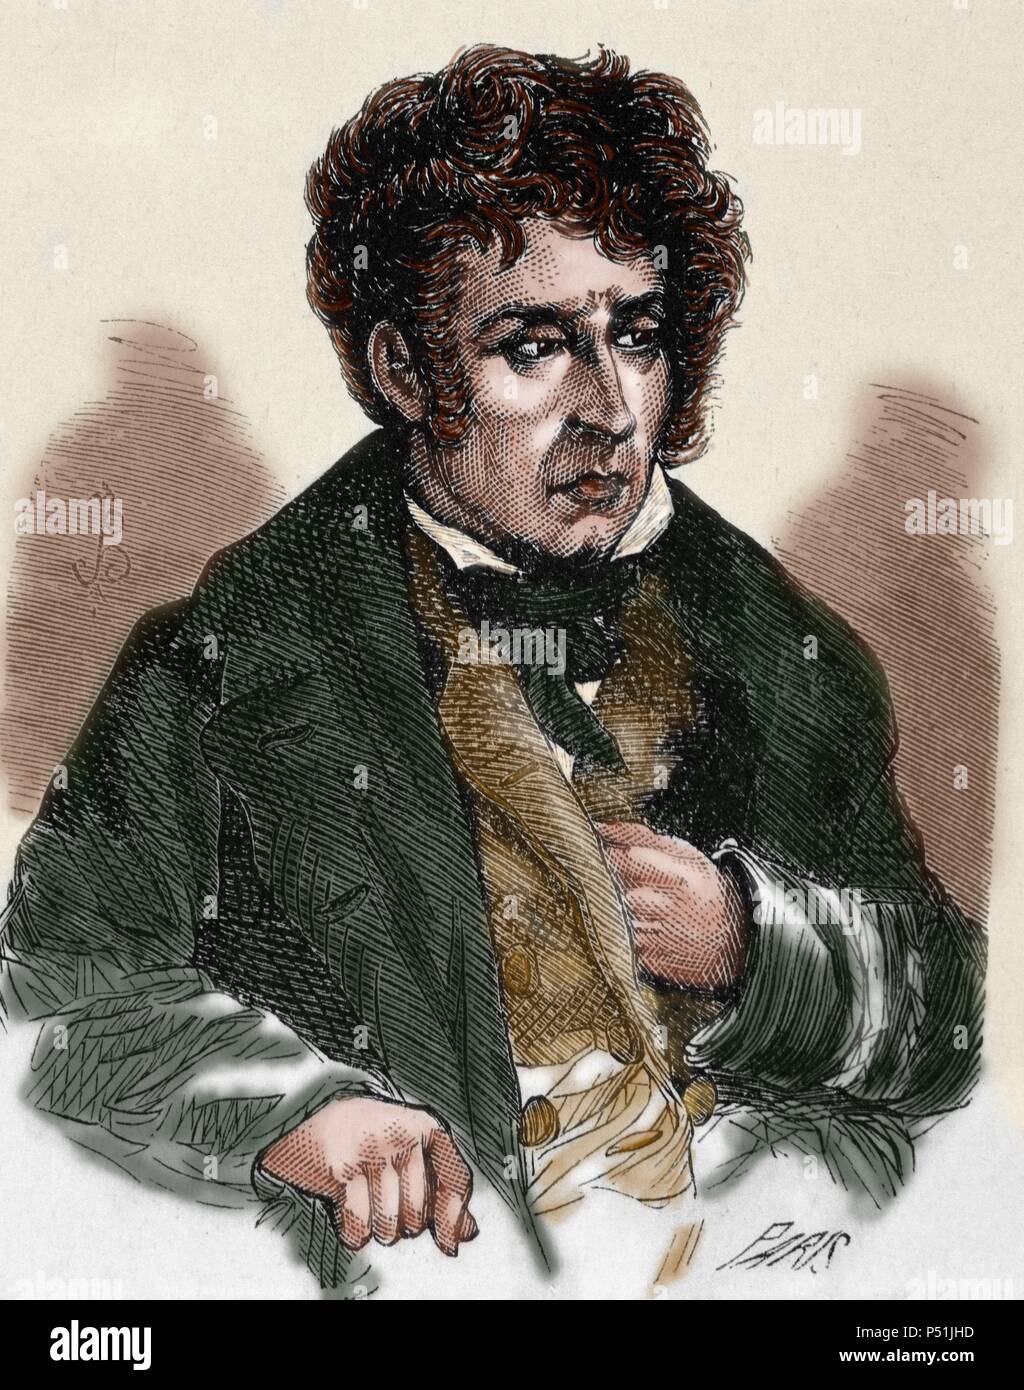 Chateaubriand, Franc¸ois Rene´, Vicomte de (1768-1848). French writer and member of the French Academy (1811). Nineteenth-century colored engraving. Stock Photo